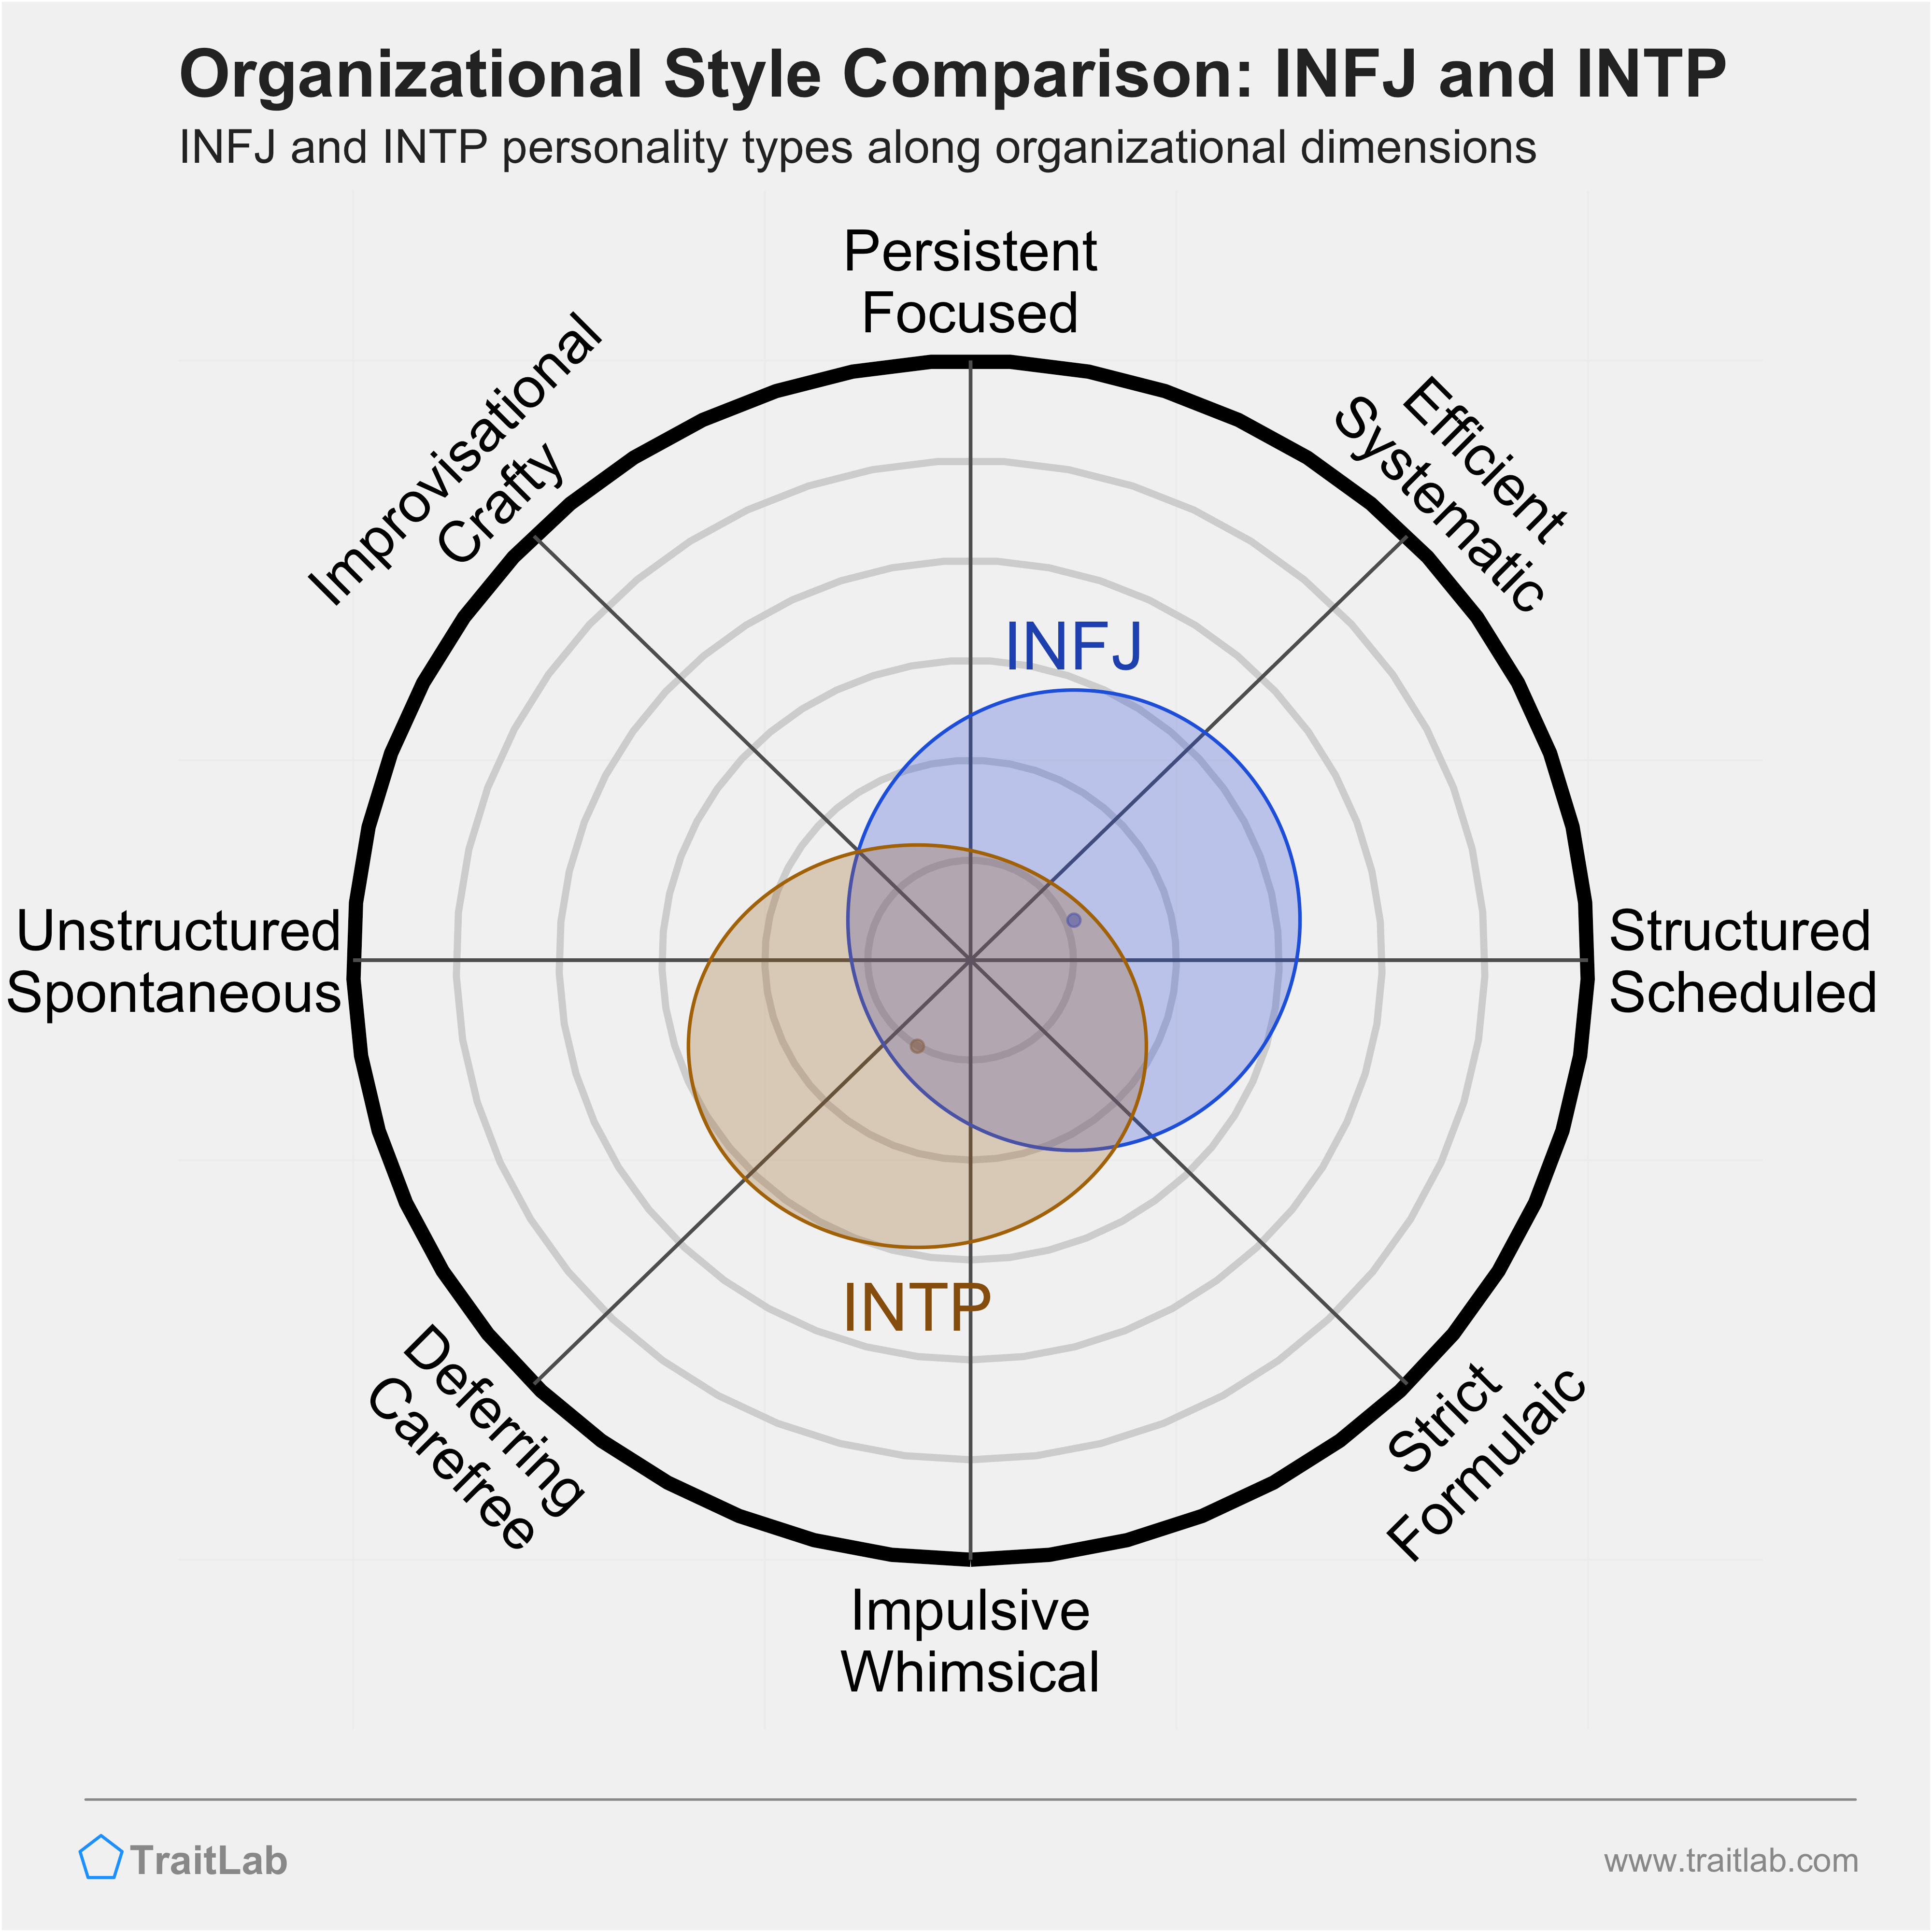 INFJ and INTP comparison across organizational dimensions